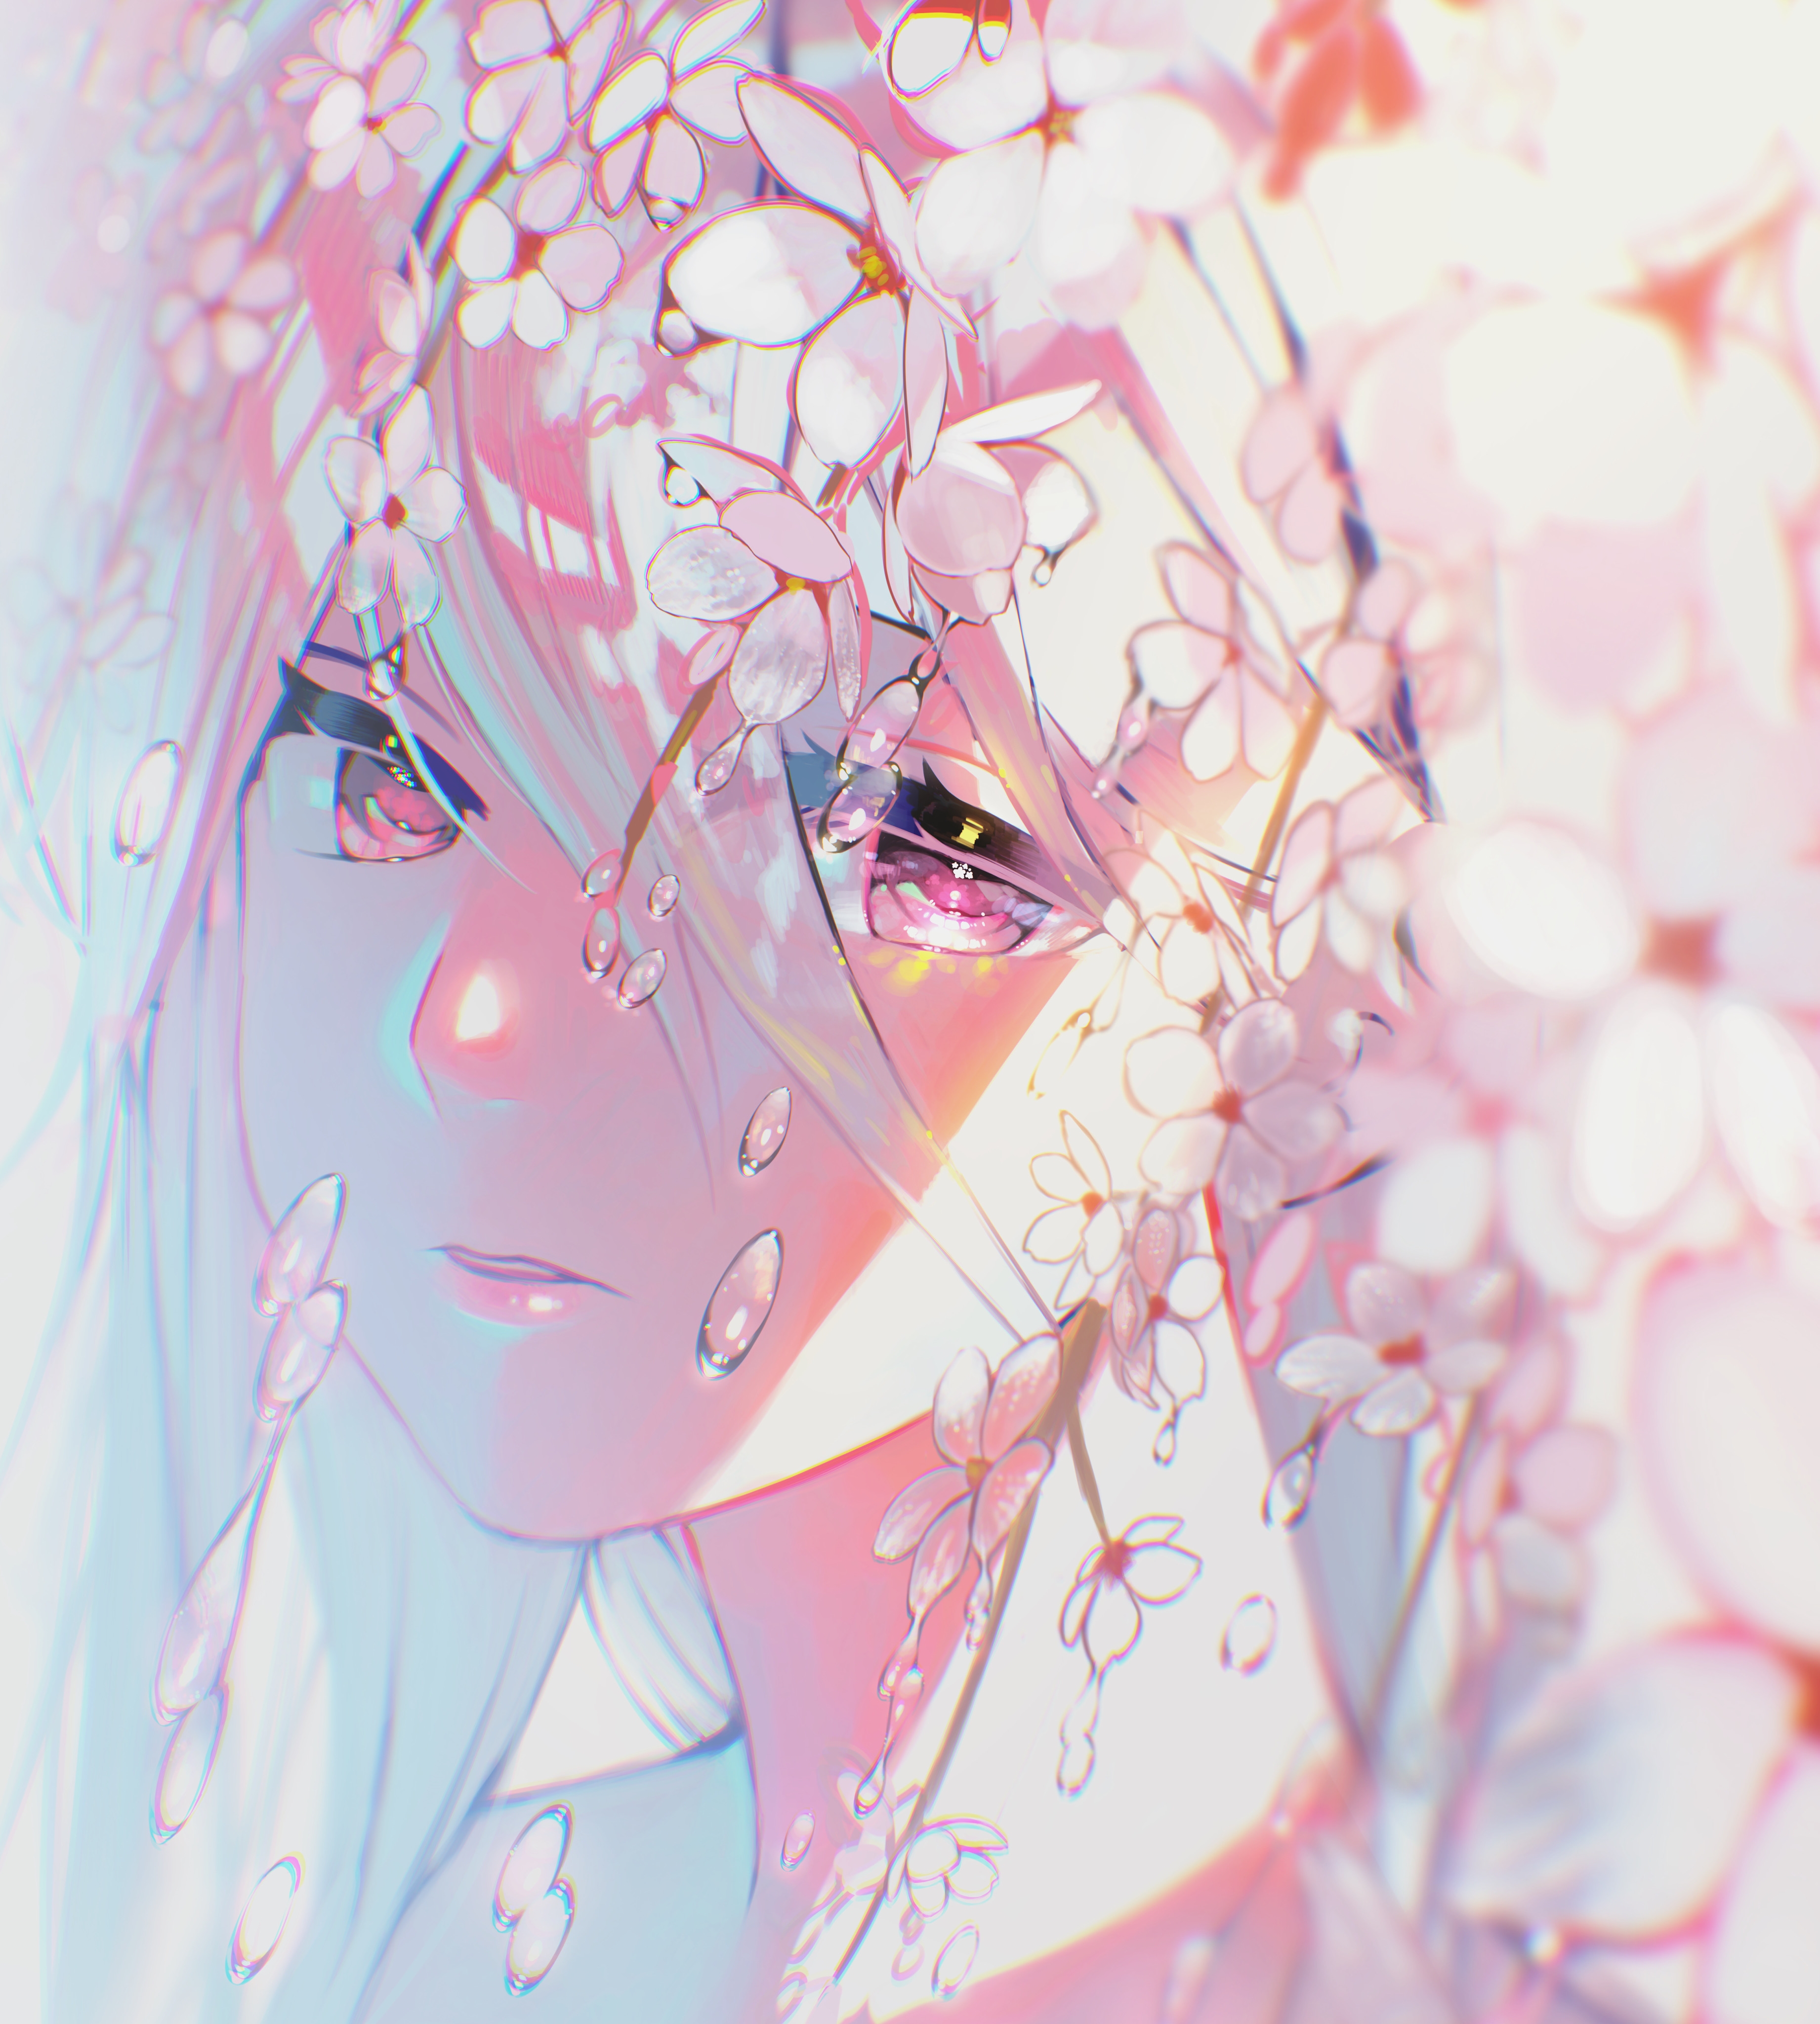 Anime 3684x4096 anime anime girls Pixiv portrait display flowers petals water drops face looking at viewer